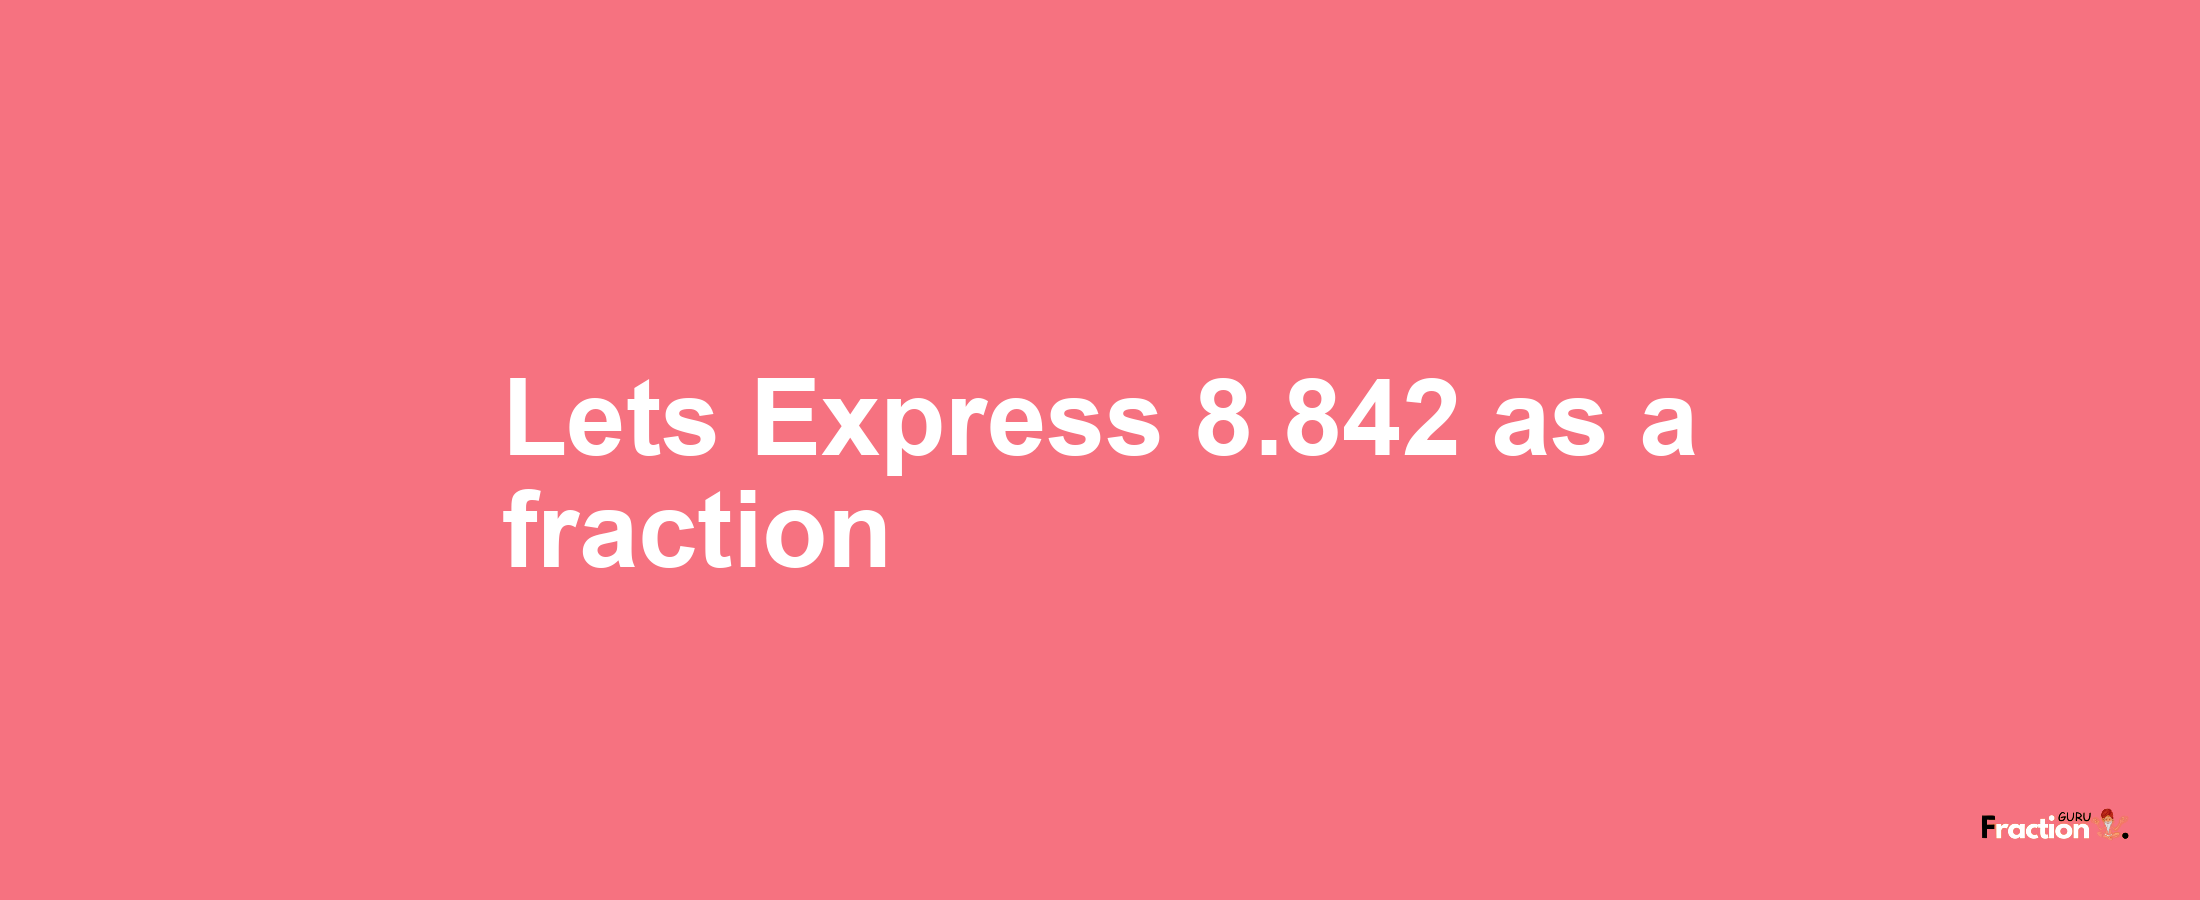 Lets Express 8.842 as afraction